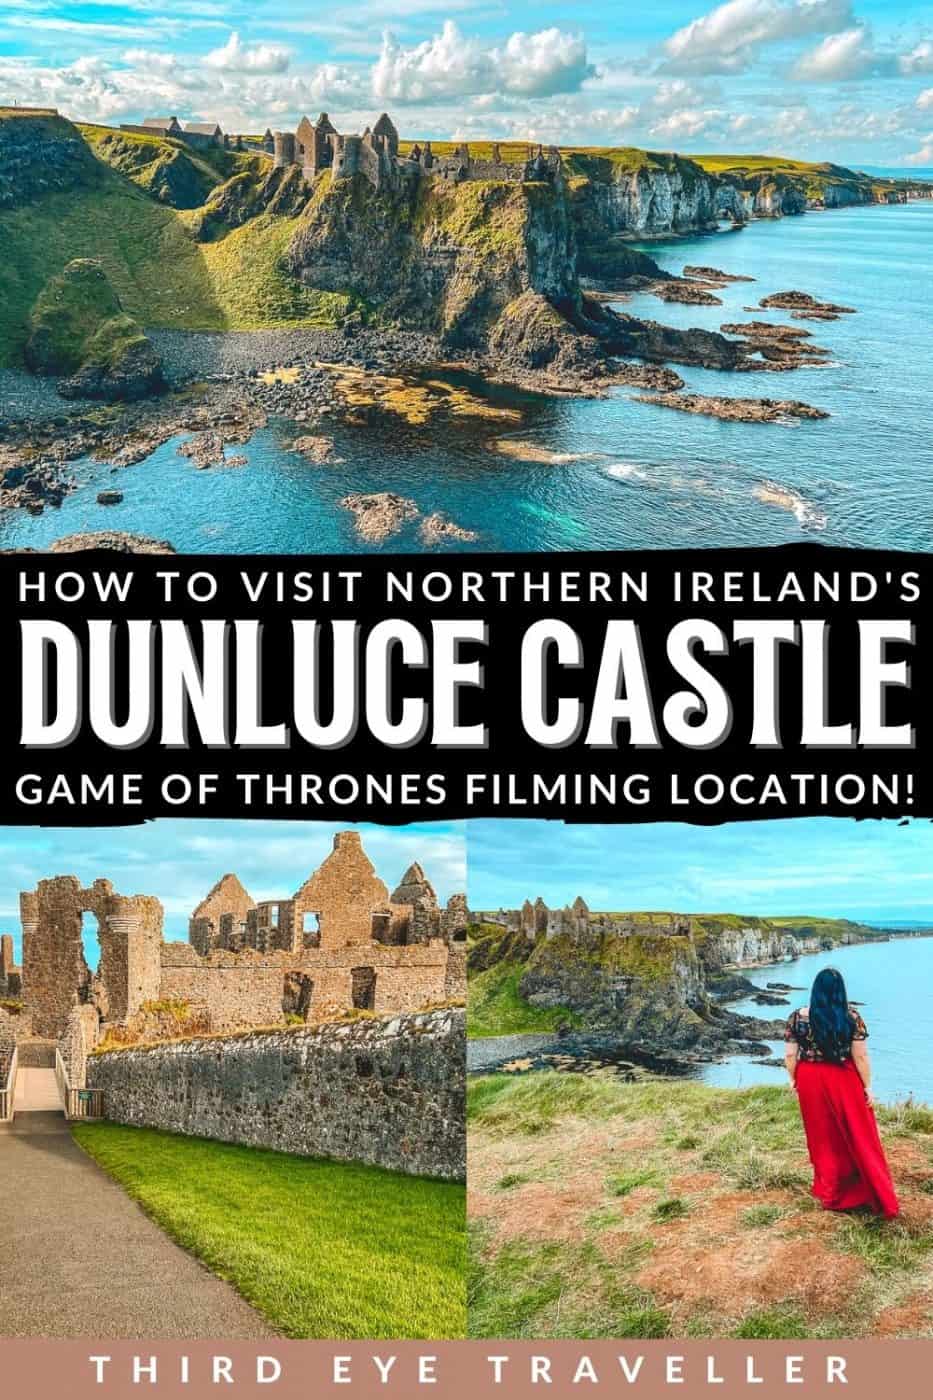 How to Visit Dunluce Castle Game of Thrones Filming Location